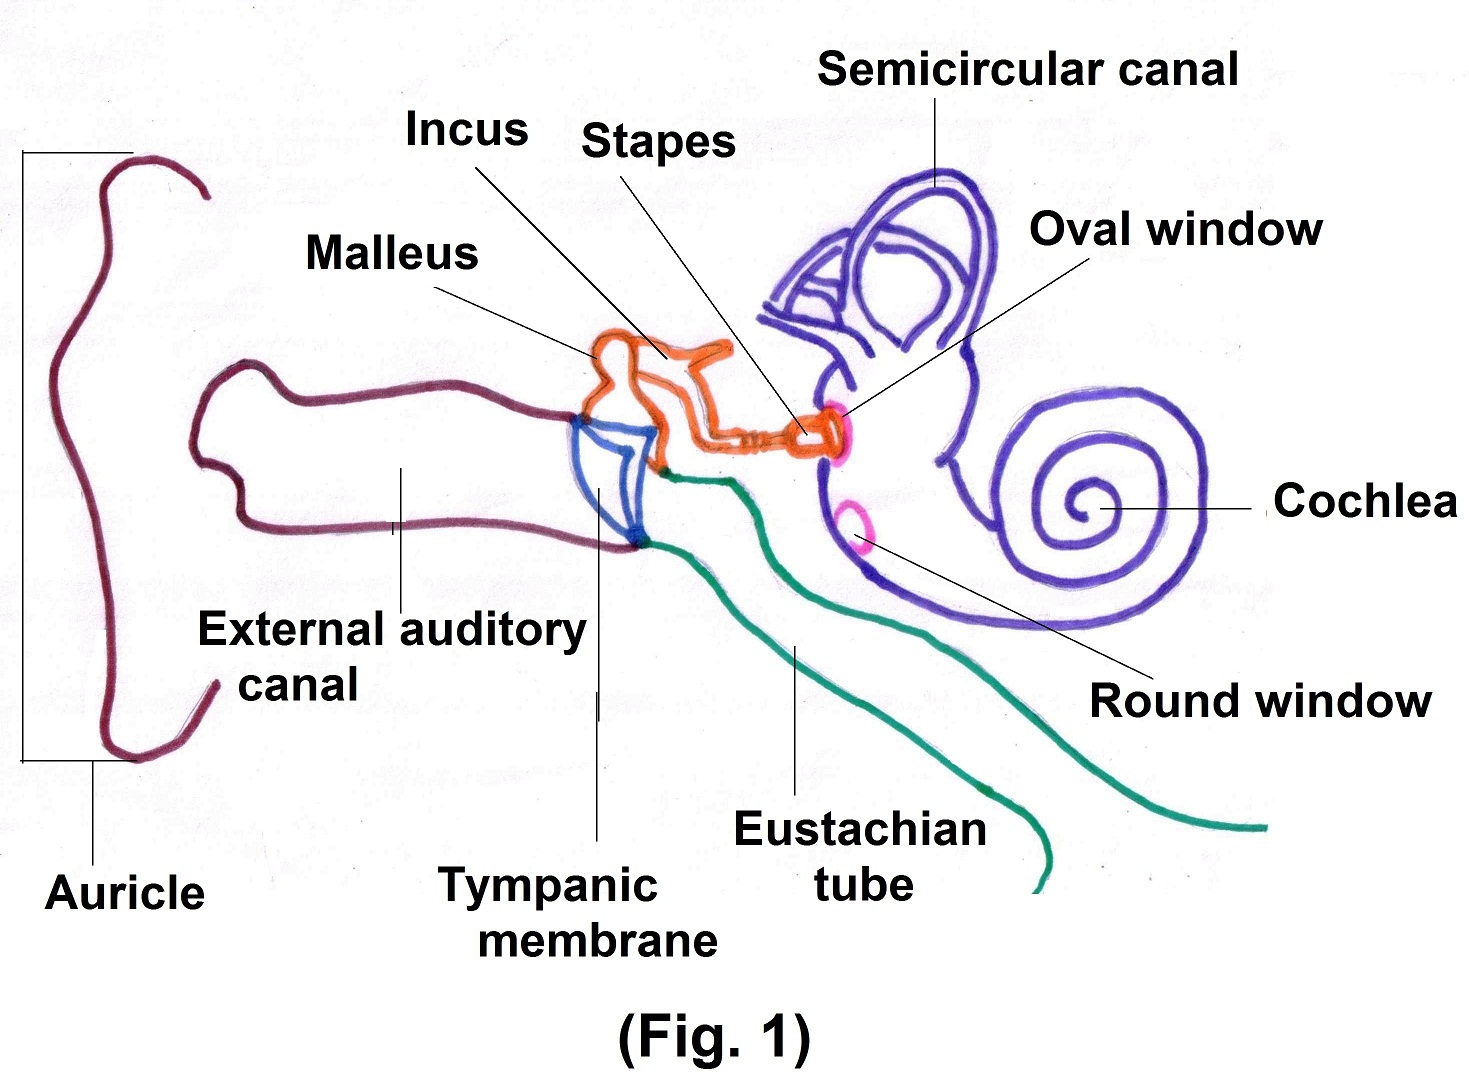 The three auditory ossicles. From left to right, the stapes